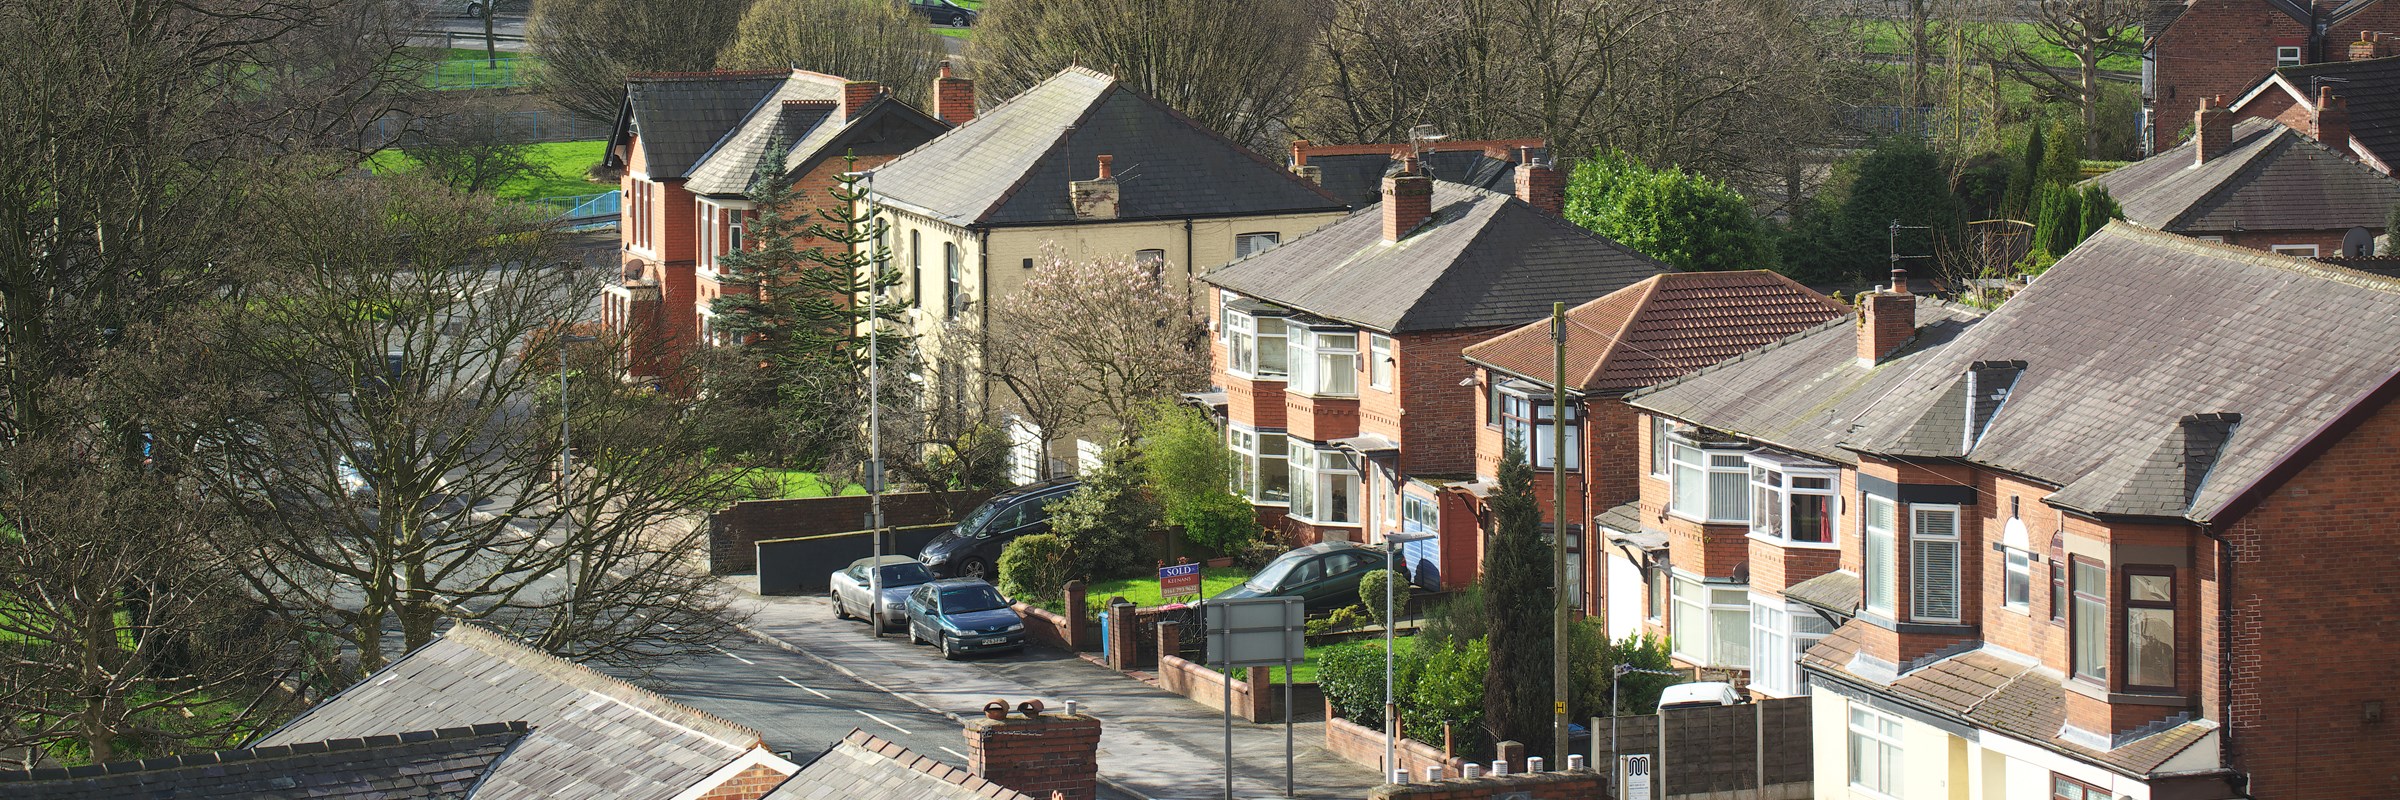 Birds eye view of a street with houses